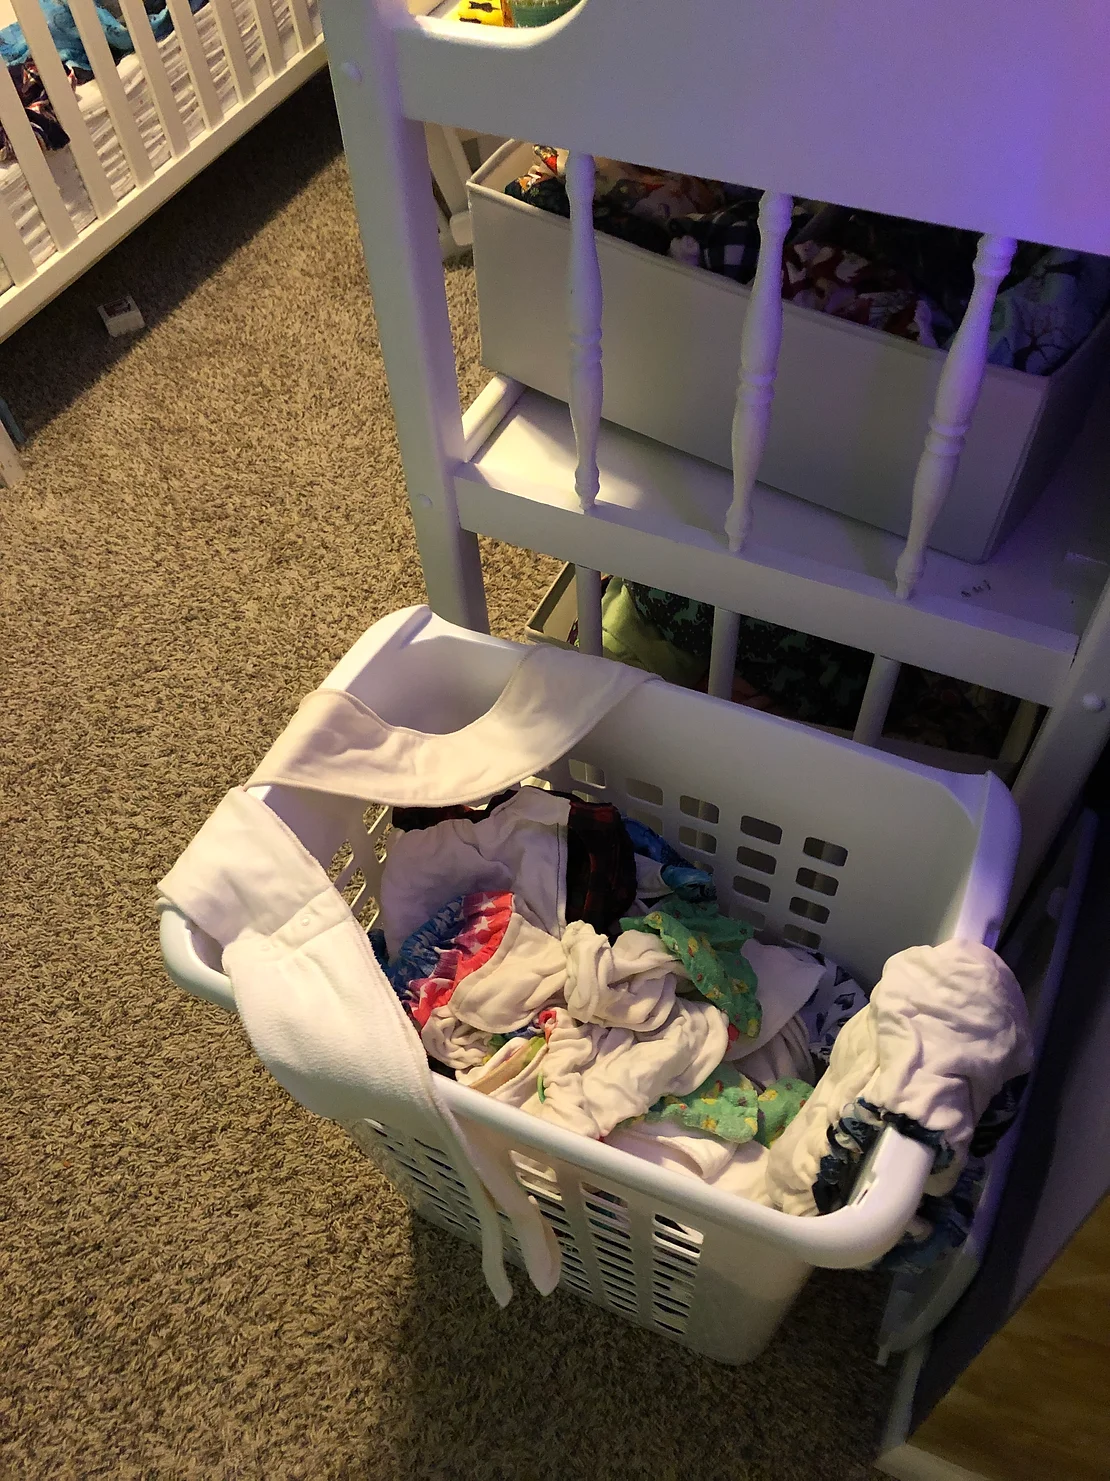 cloth diapers in laundry basket, ready to wash